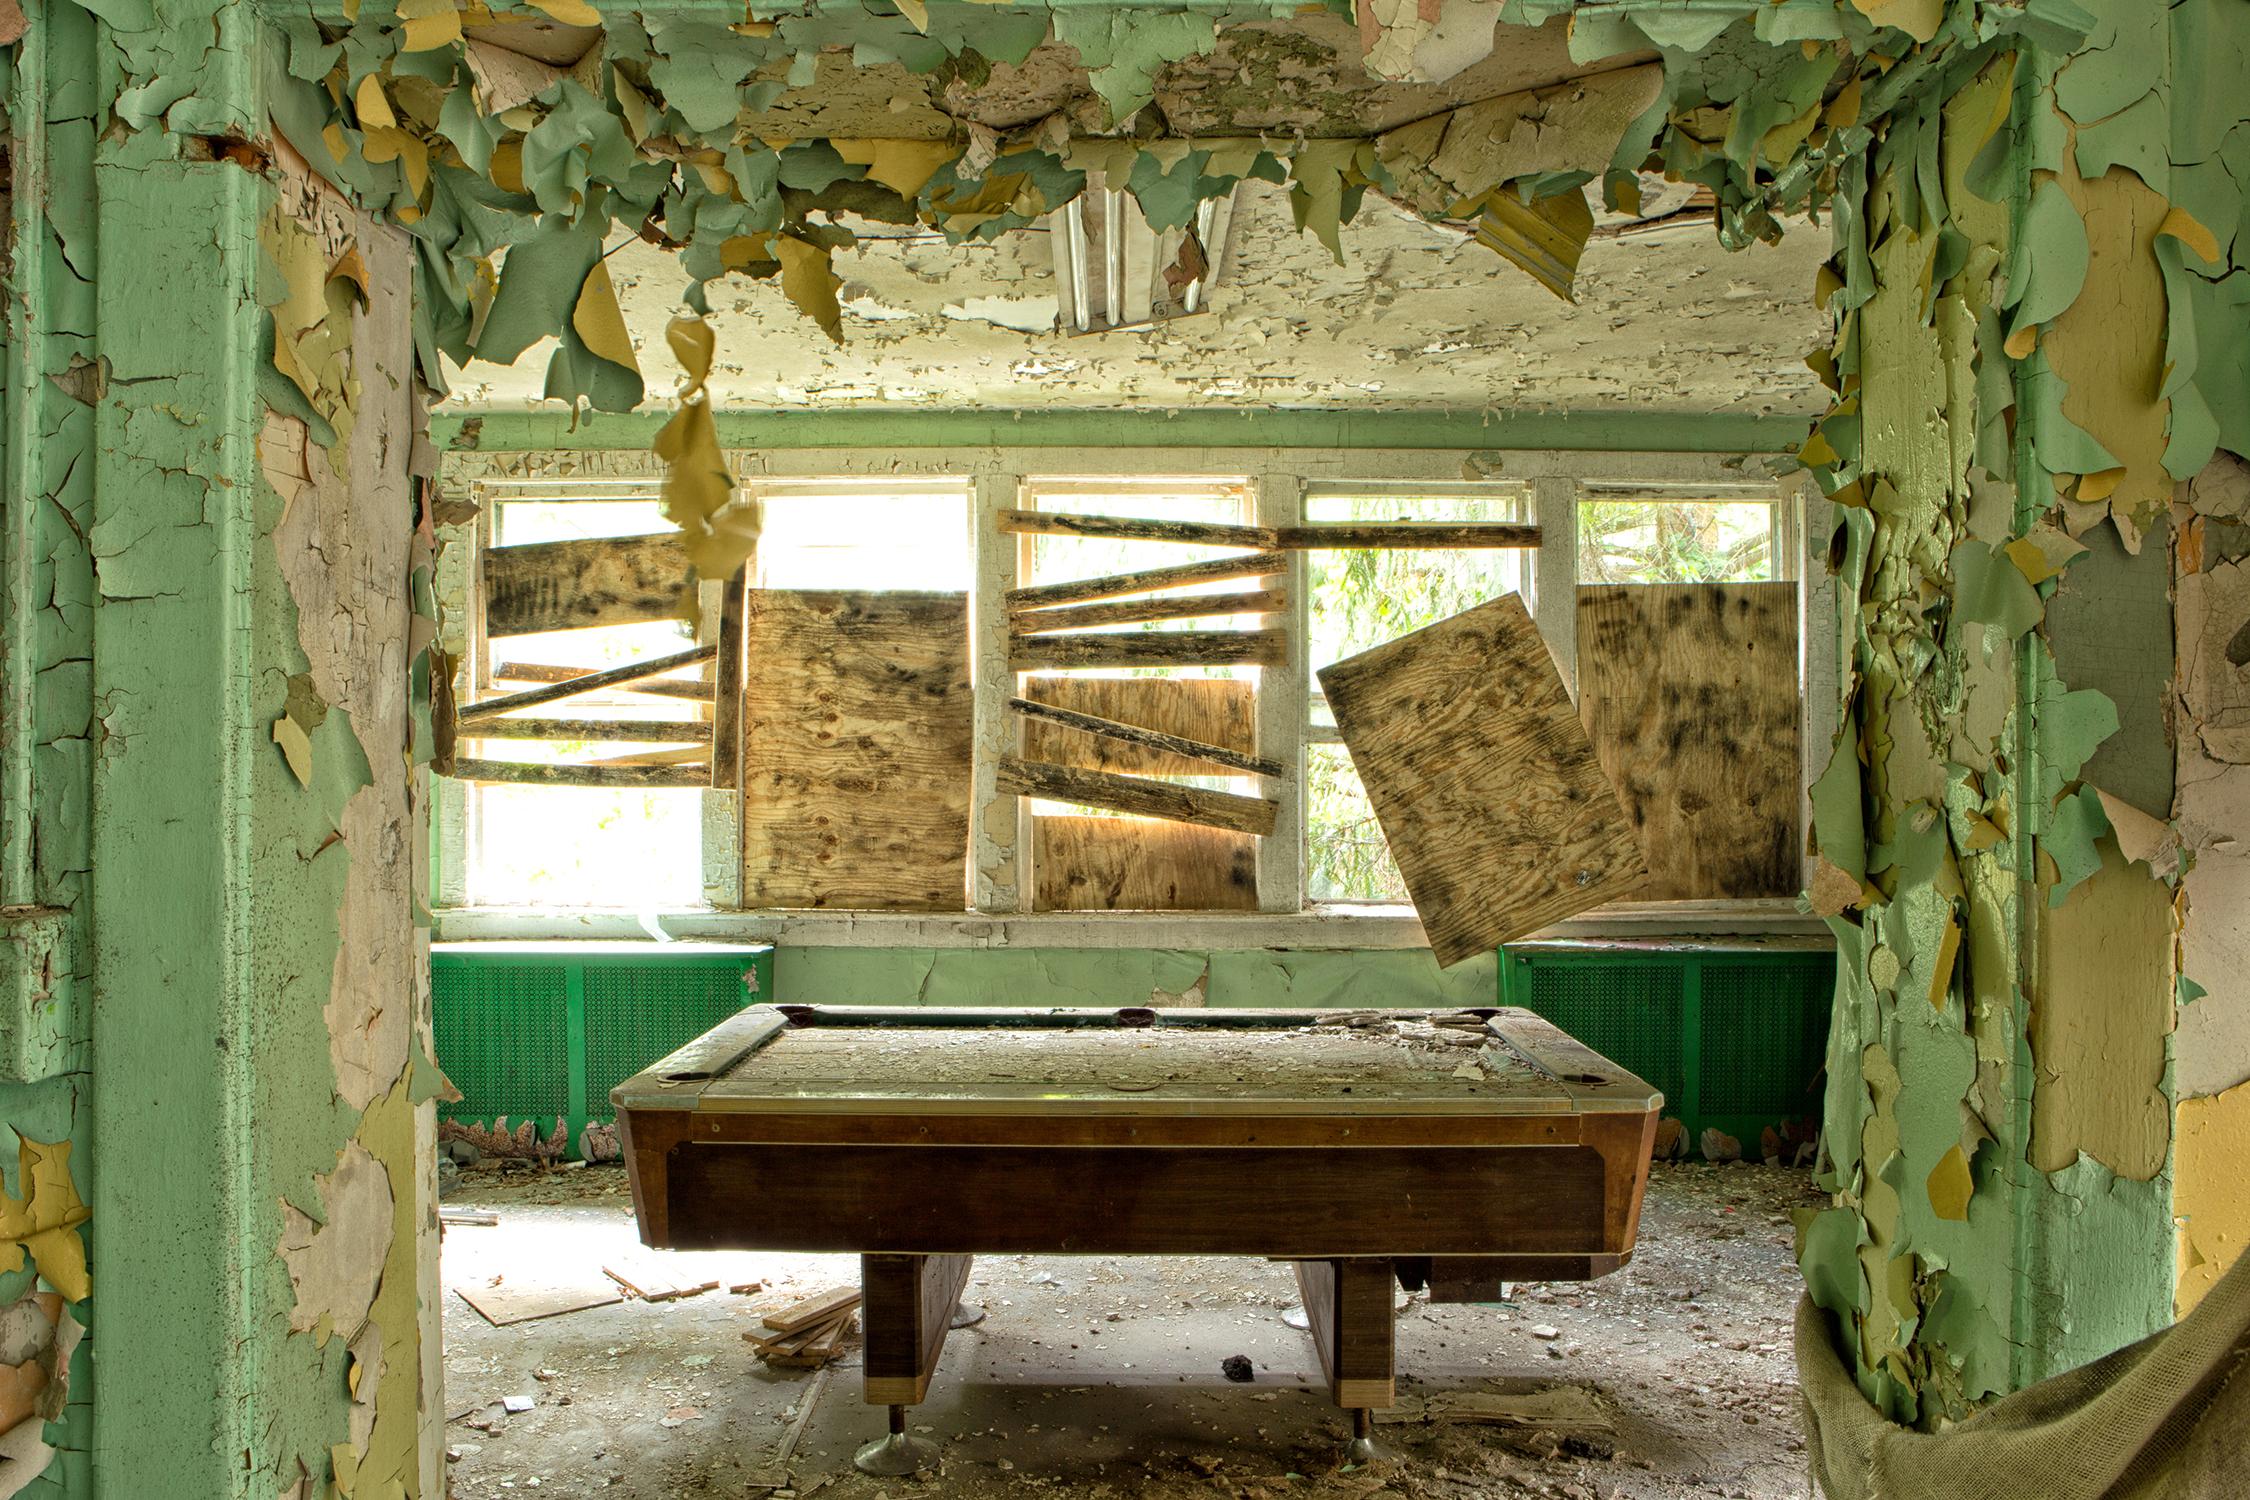 "Outward", abandoned, pool table, peeling paint, interior, green, photograph - Photograph by Rebecca Skinner